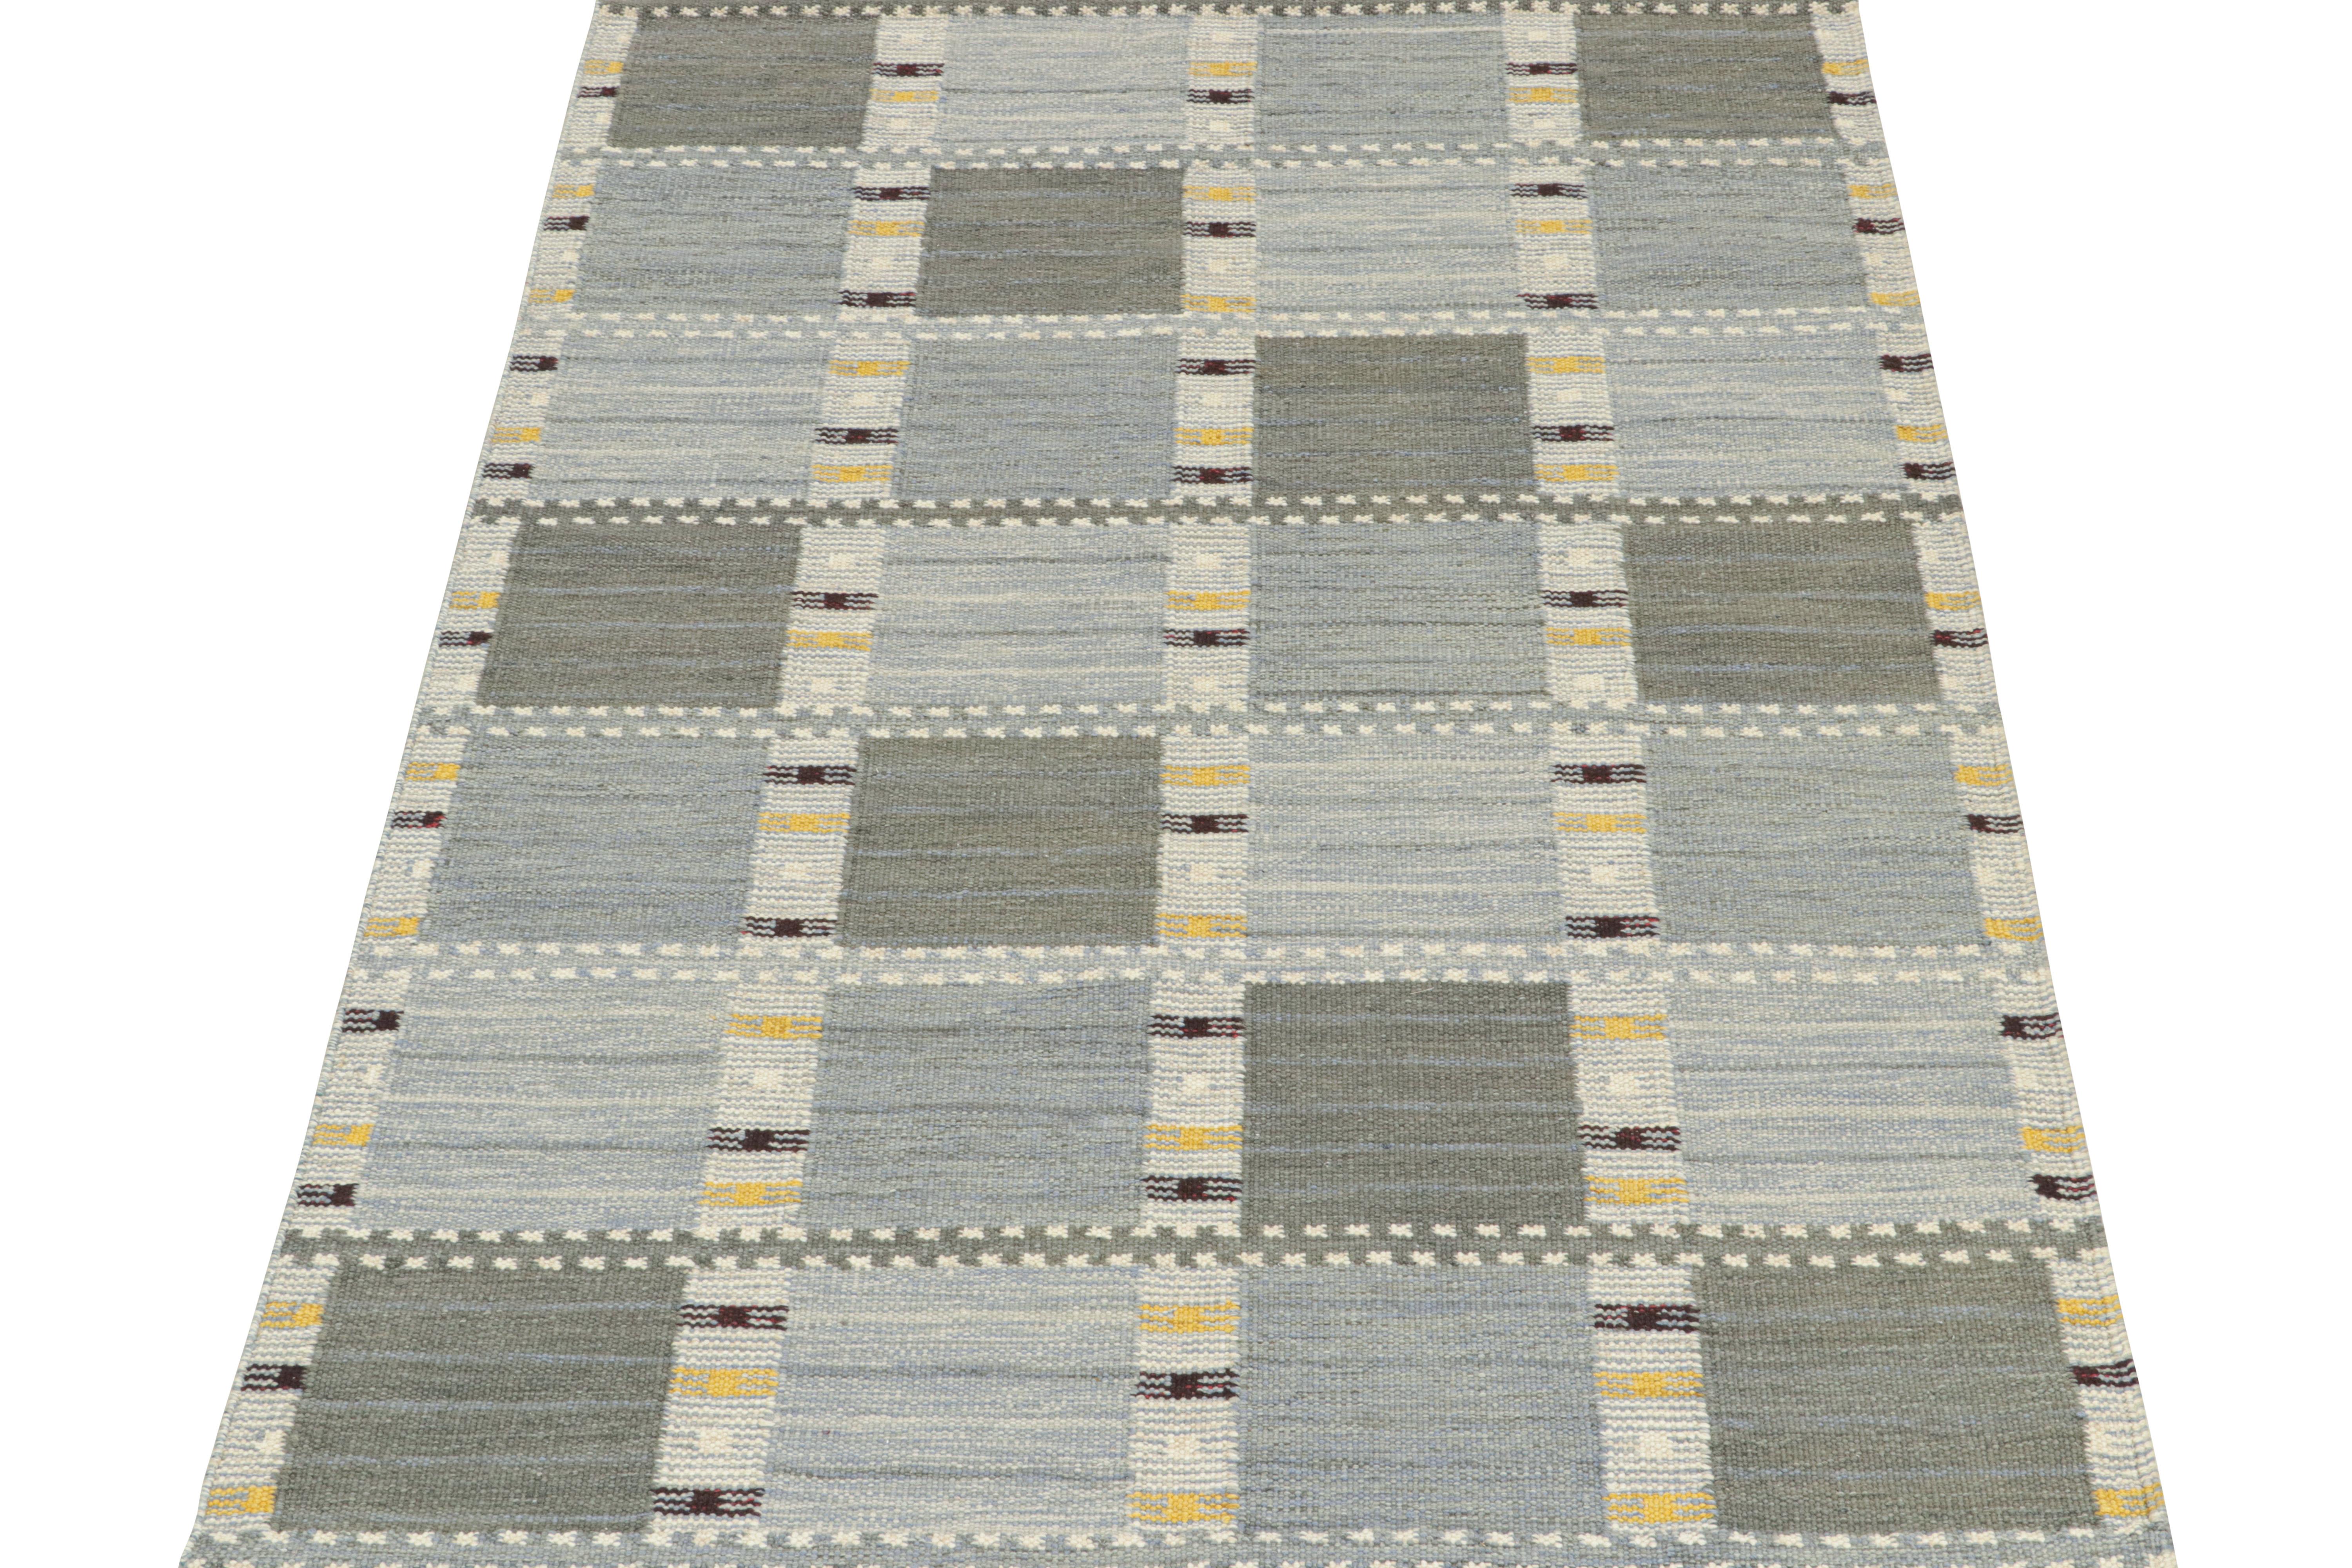 This custom flat weave design is from the Scandinavian Kilim collection by Rug & Kilim. Handwoven in wool and natural yarns, its design reflects a contemporary take on mid-century Rollakans and Swedish Deco style.

On the Design:

This new flat